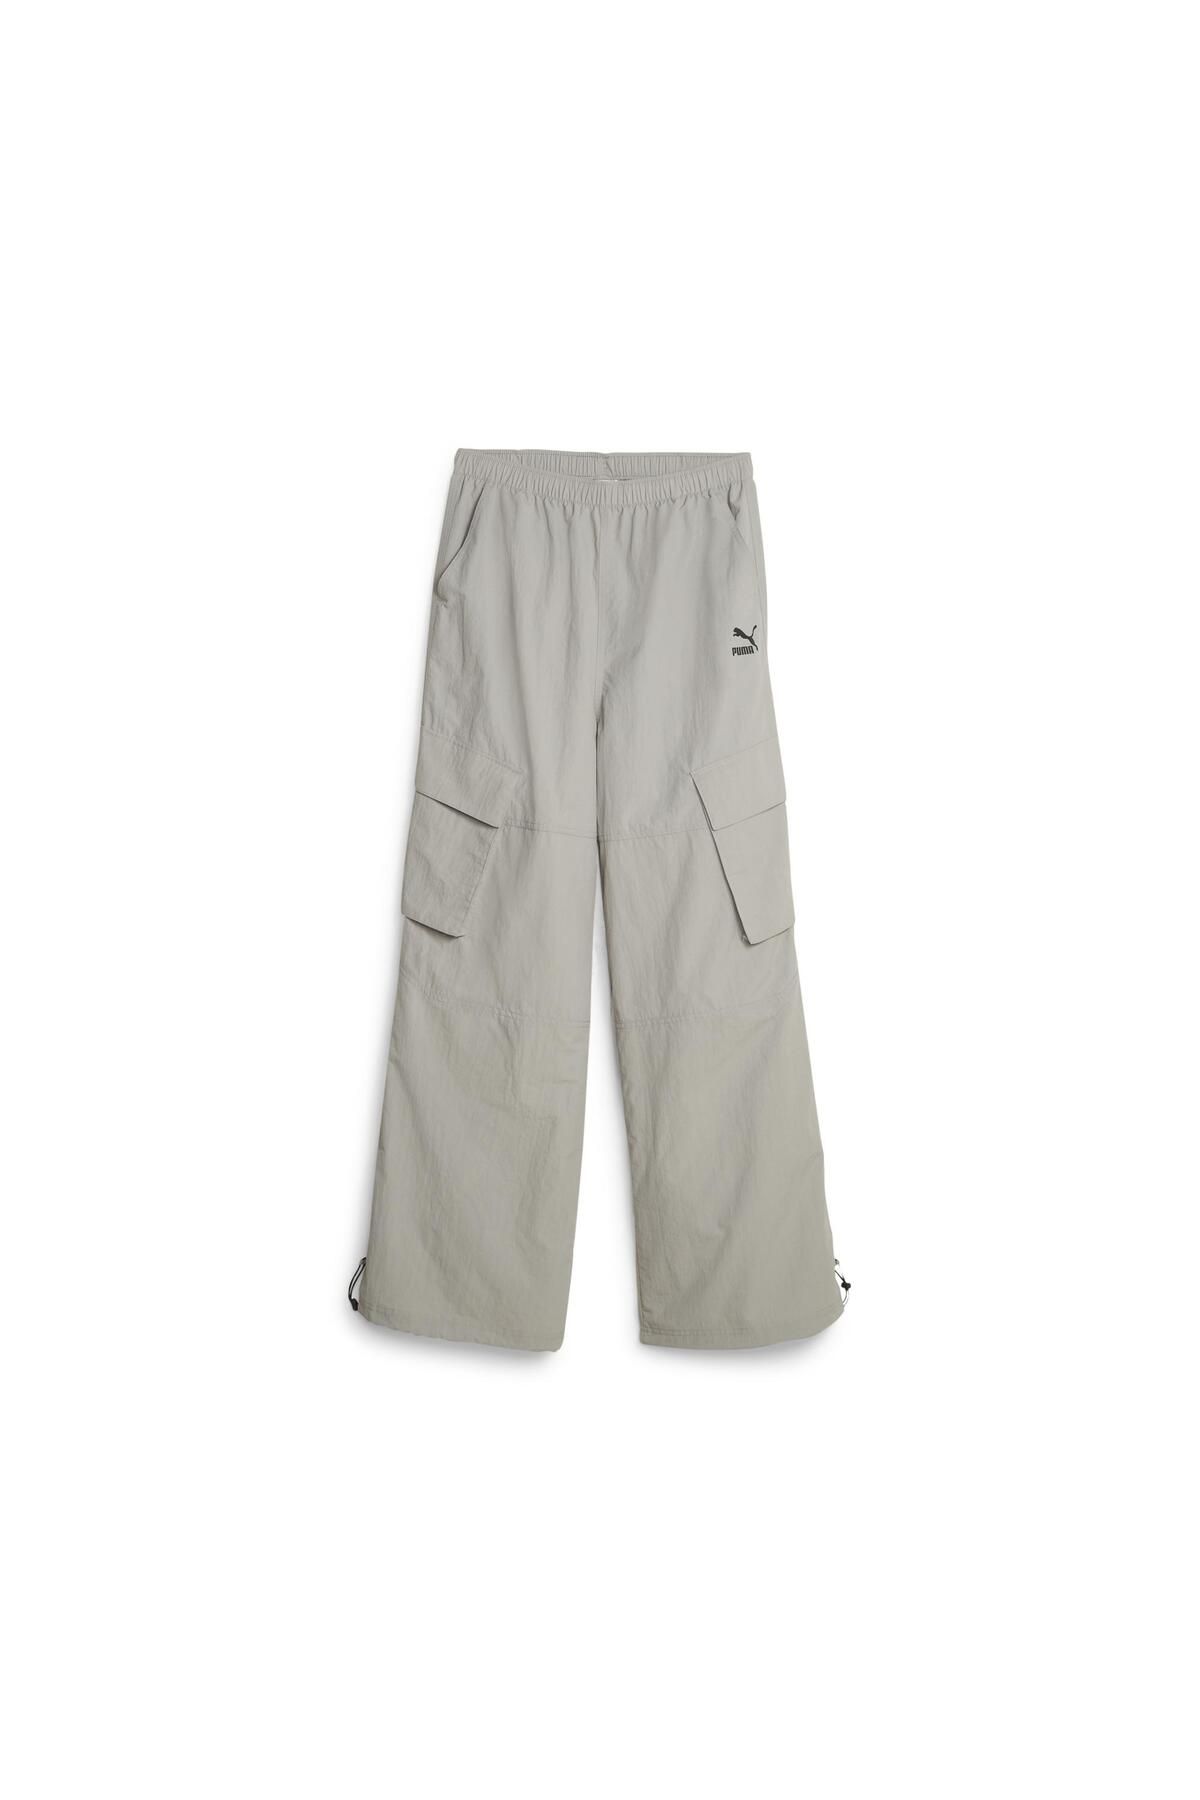 Puma DARE TO Relaxed Woven Pants